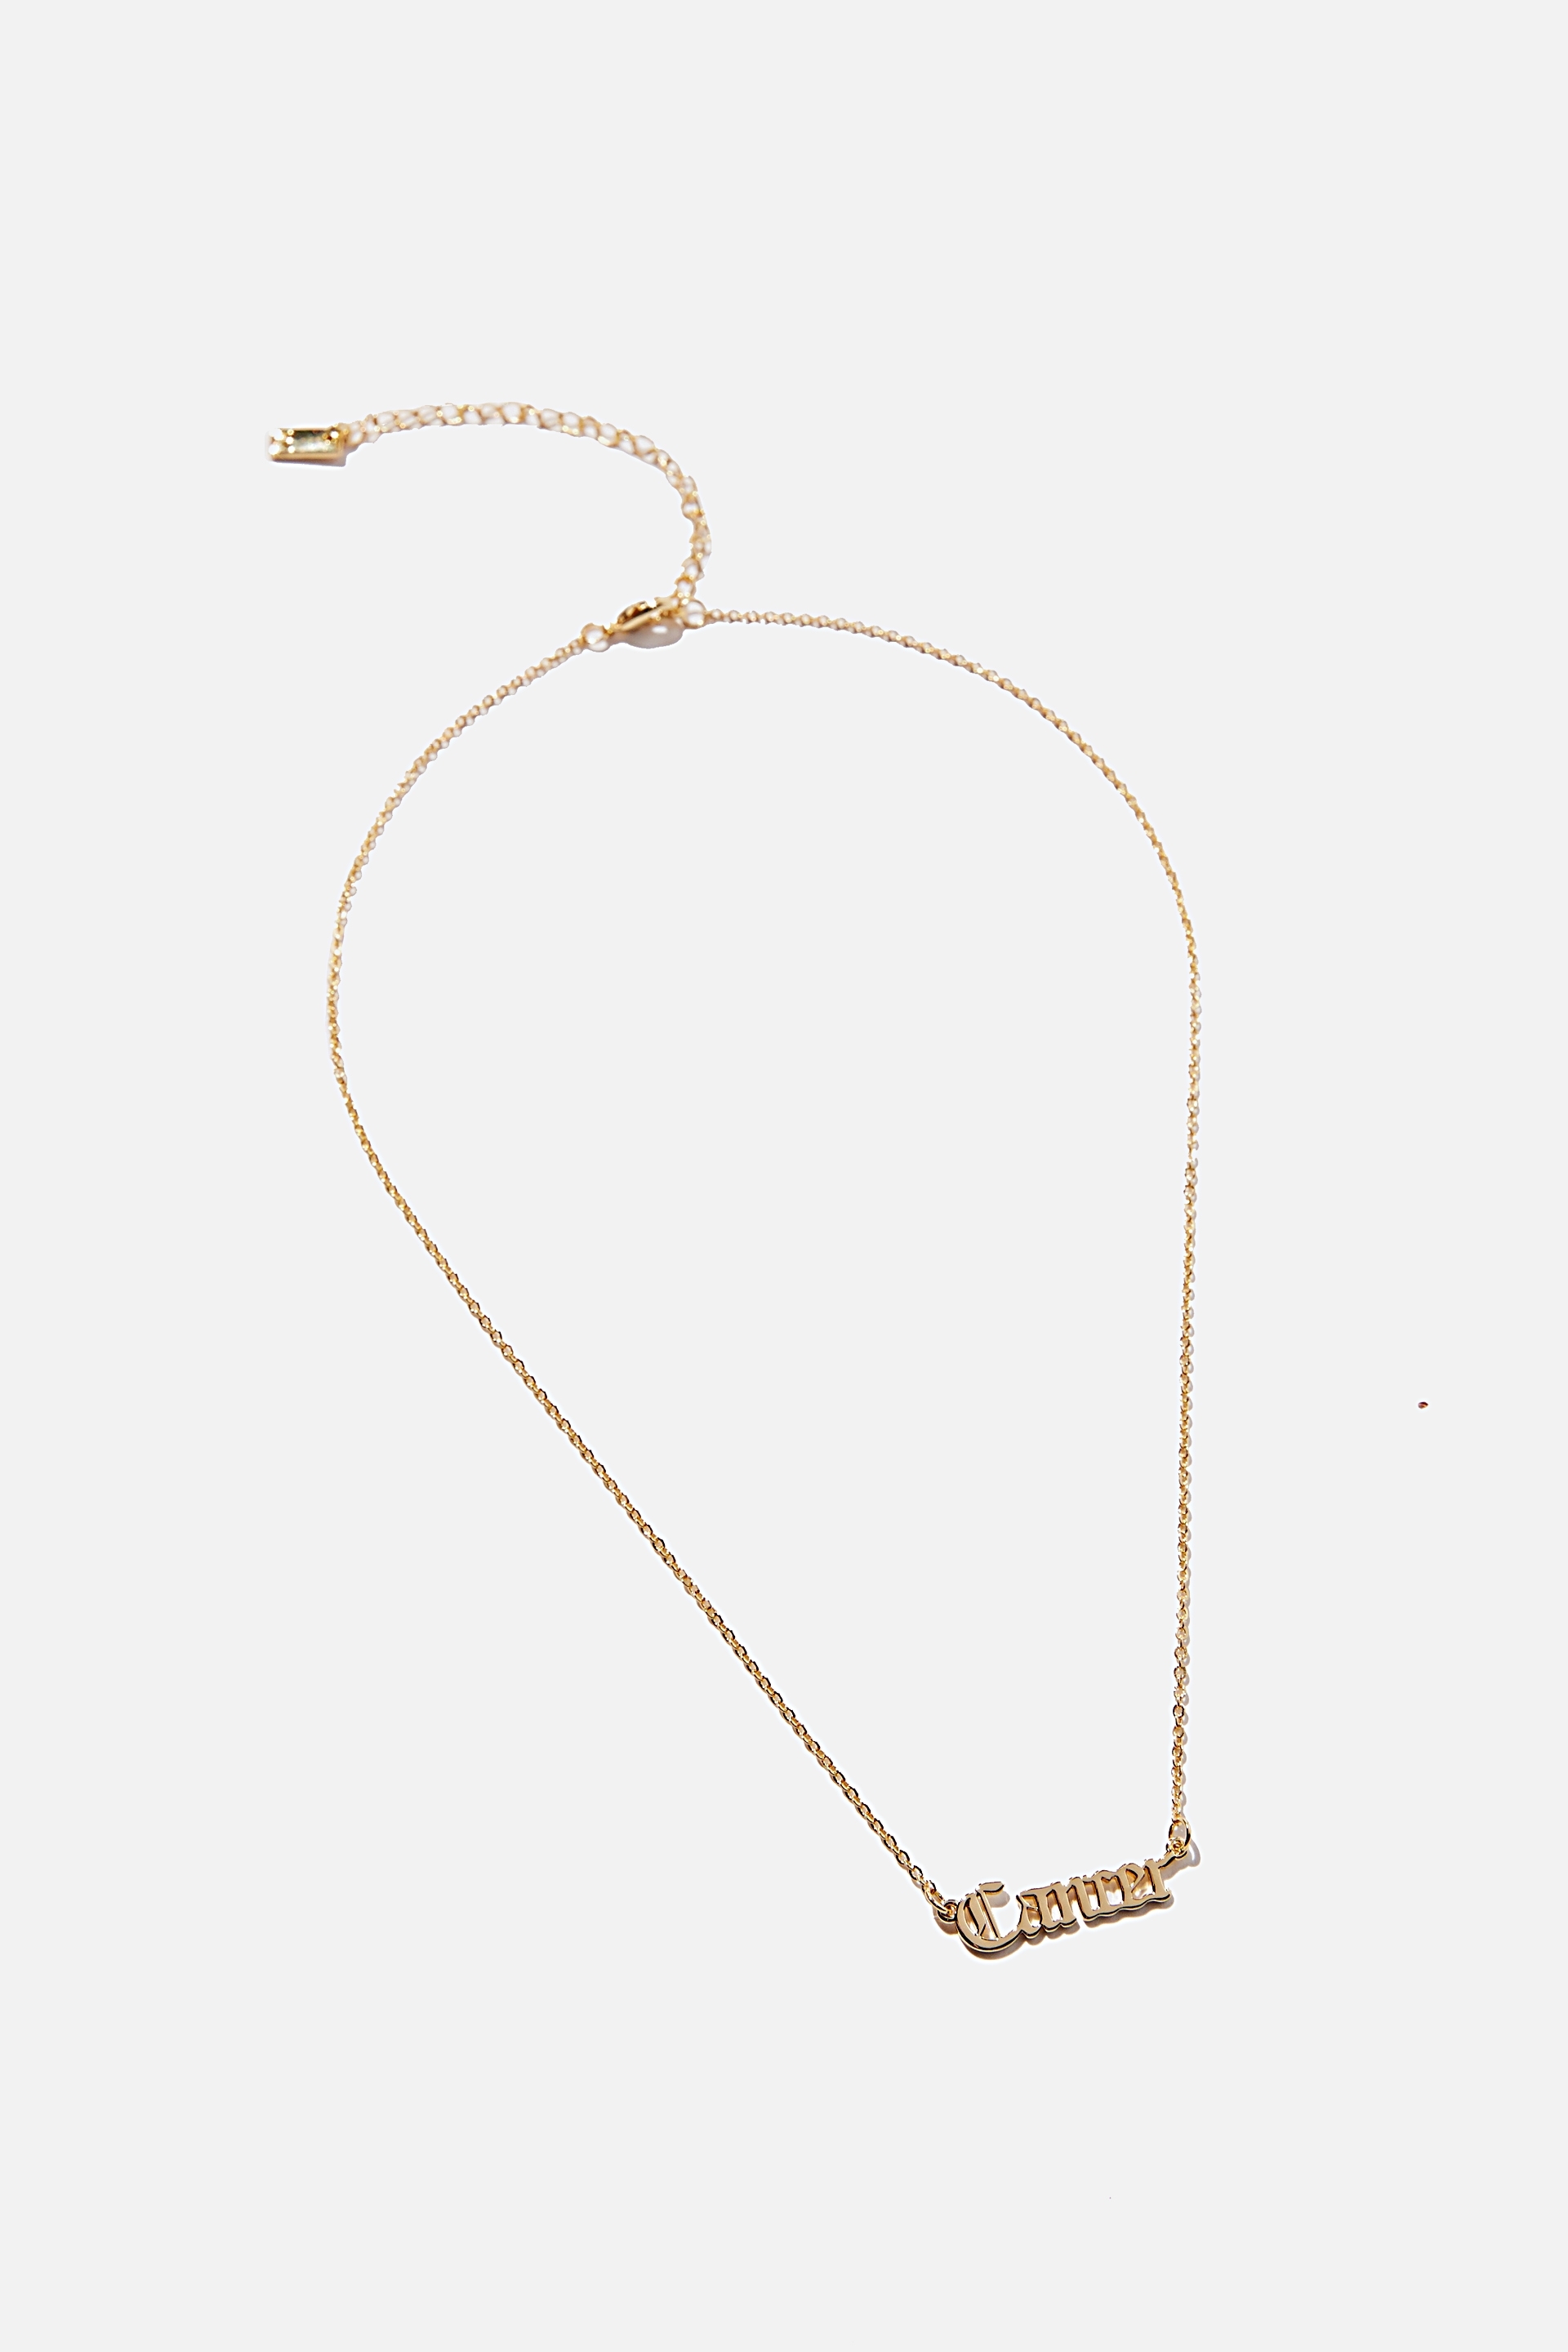 Rubi - Premium Pendant Necklace - Gold plated cancer